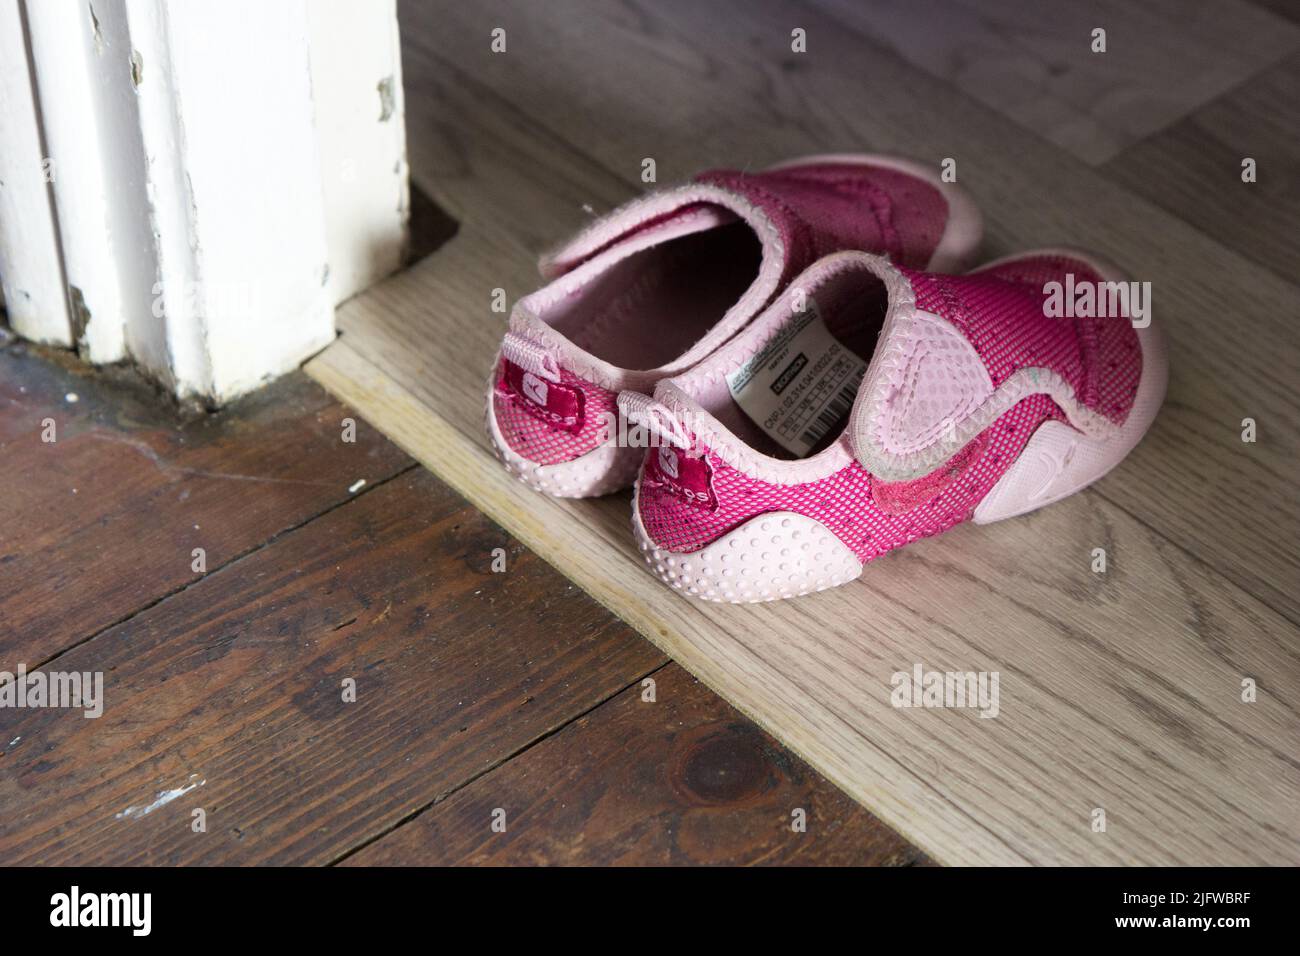 Valenciennes, France 2017/02/06. Empty Domyos shoes of a little 3-year-old child put on a doorstep Stock Photo